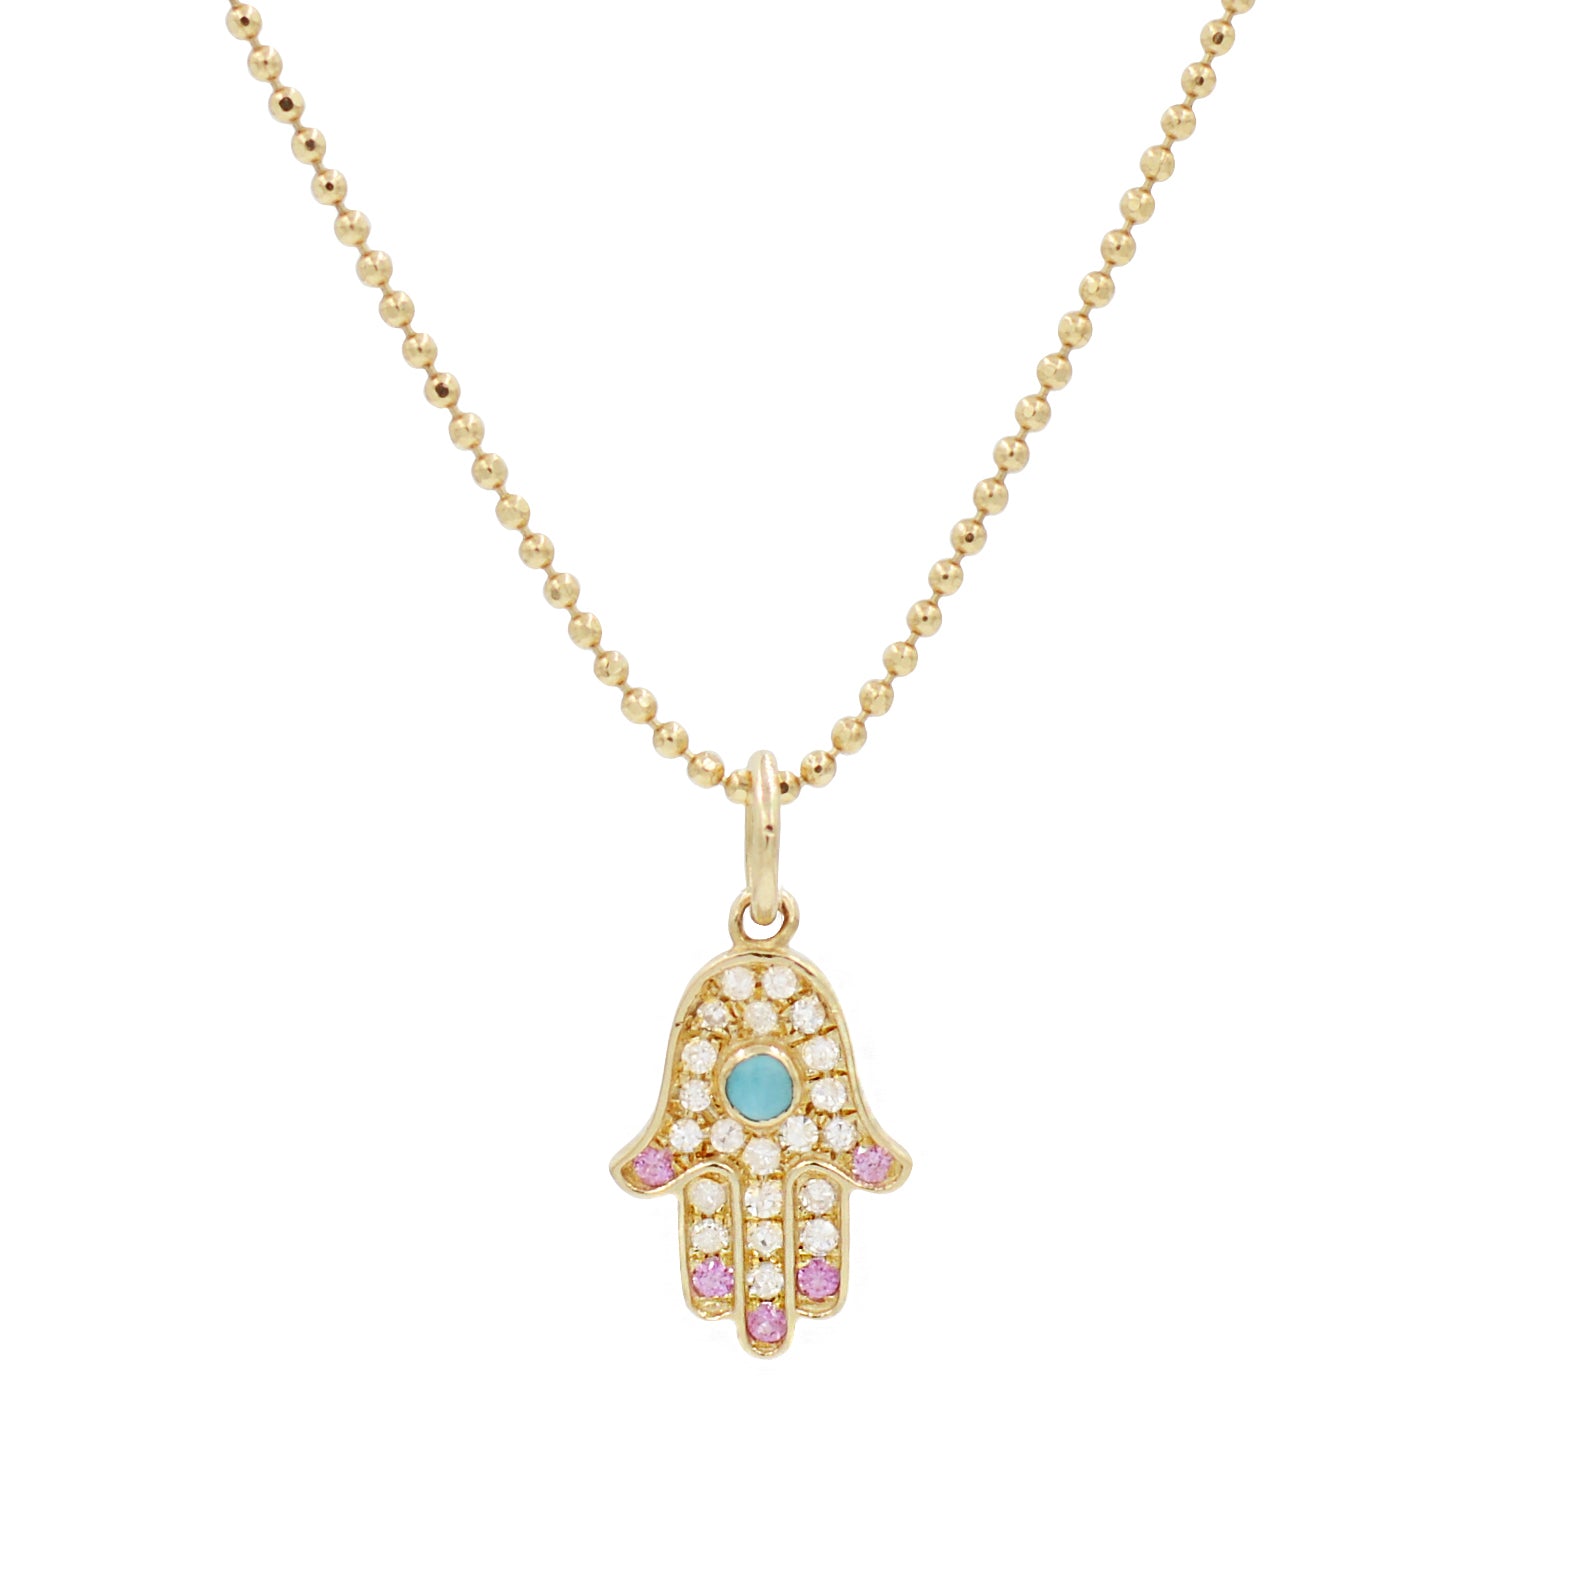 Hamsa Hand Necklace With Pink Sapphire, Turquoise and Diamonds